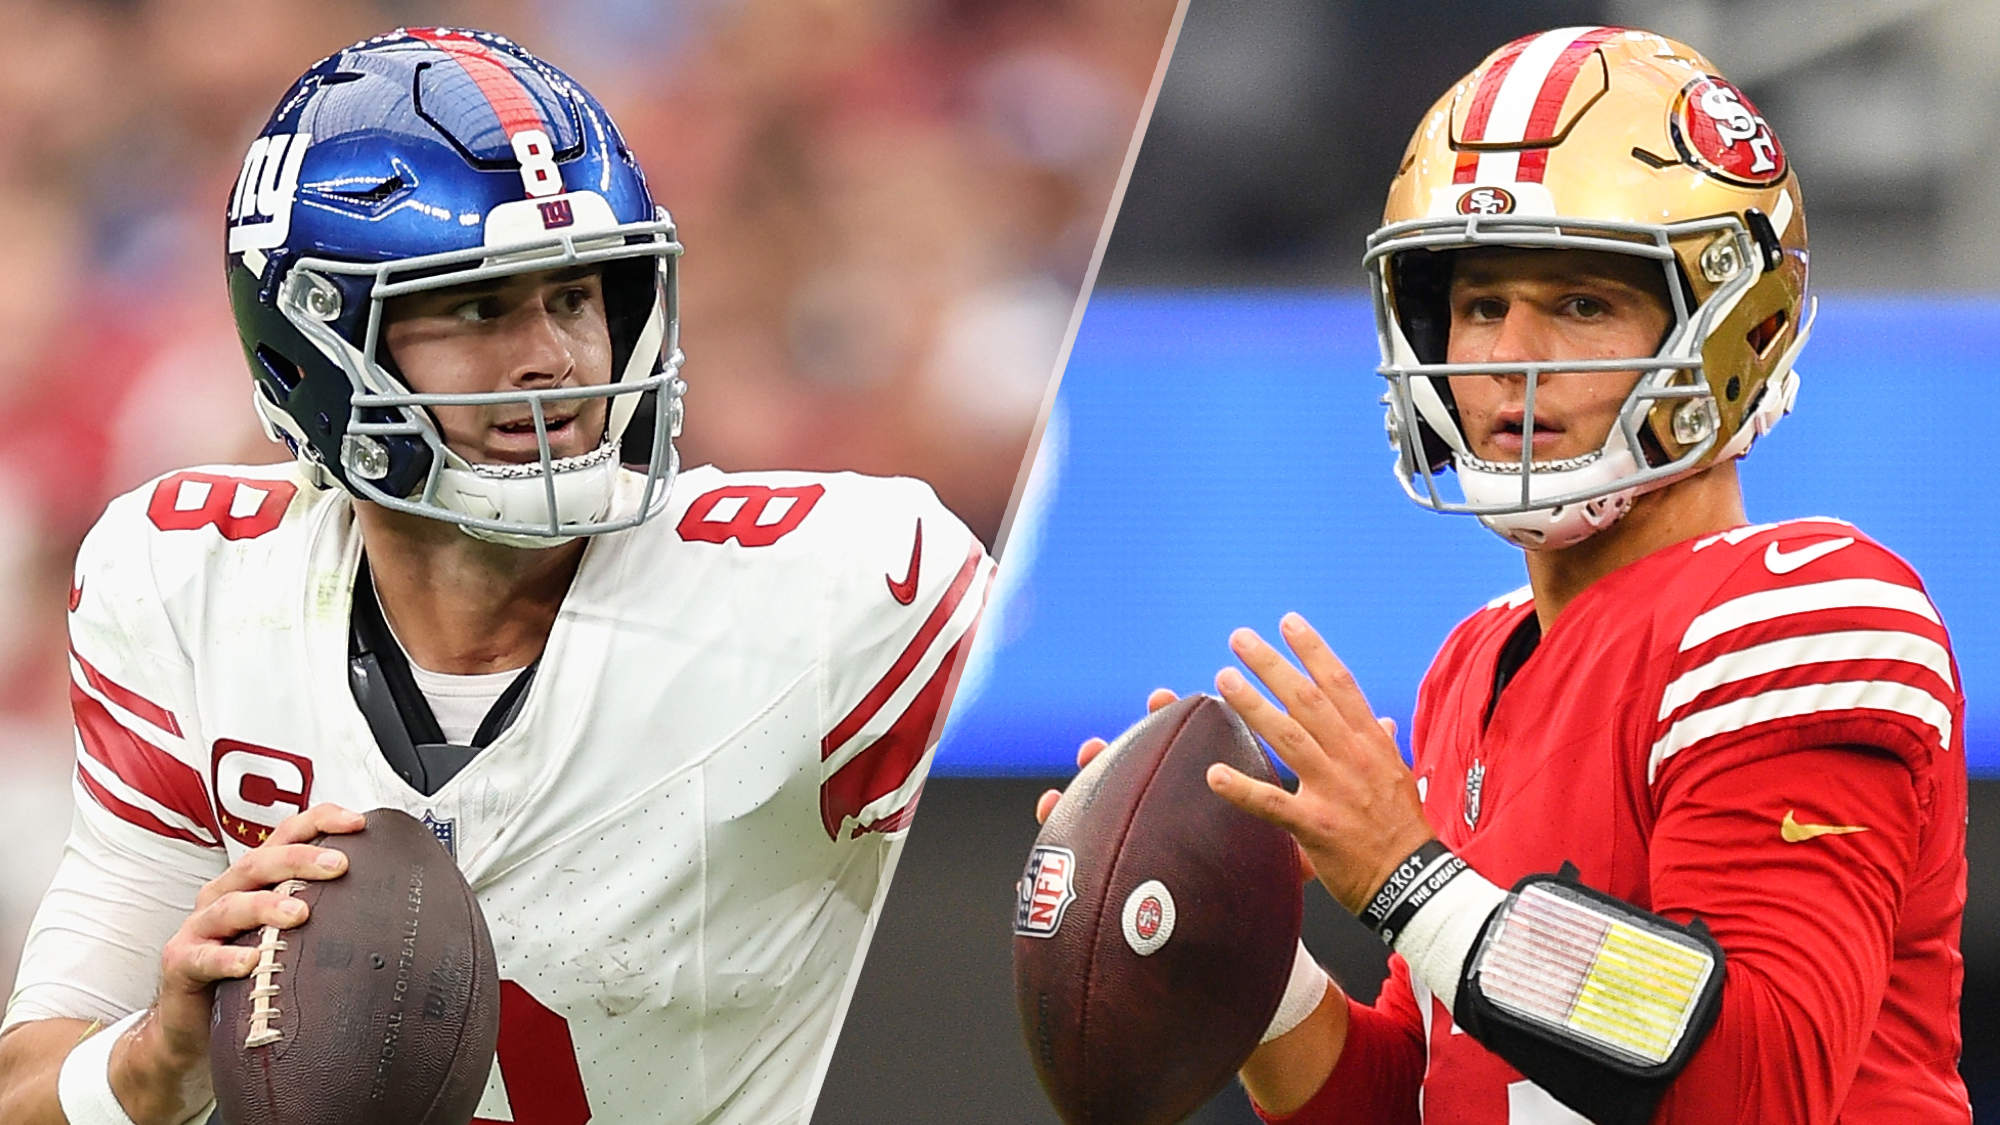 How to Stream Giants vs 49ers Live Free With Caesars Sportsbook - NFL Week 3